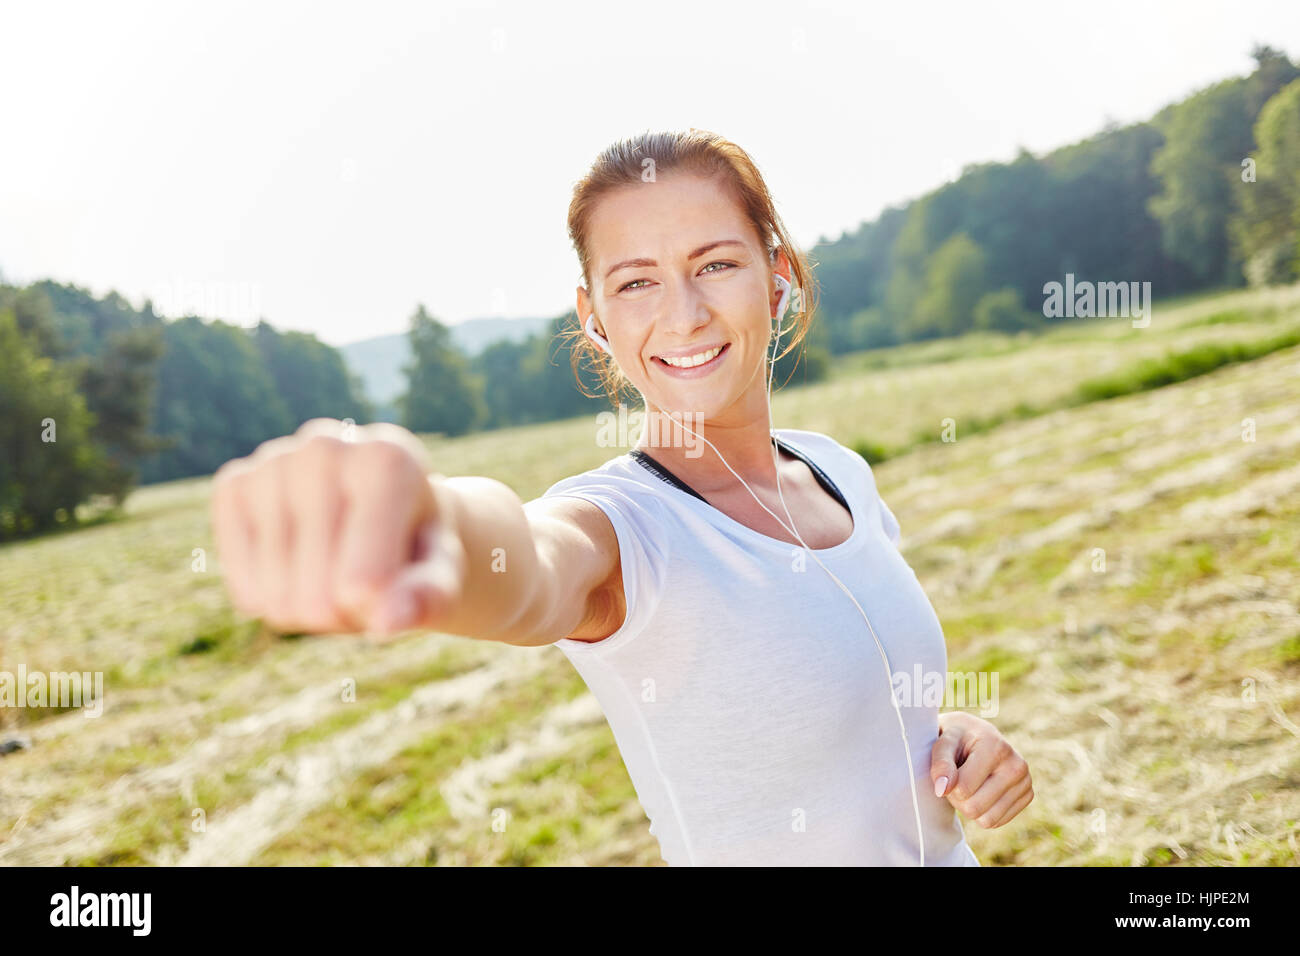 Young woman clenches fist in the air as boxing workout training Stock Photo